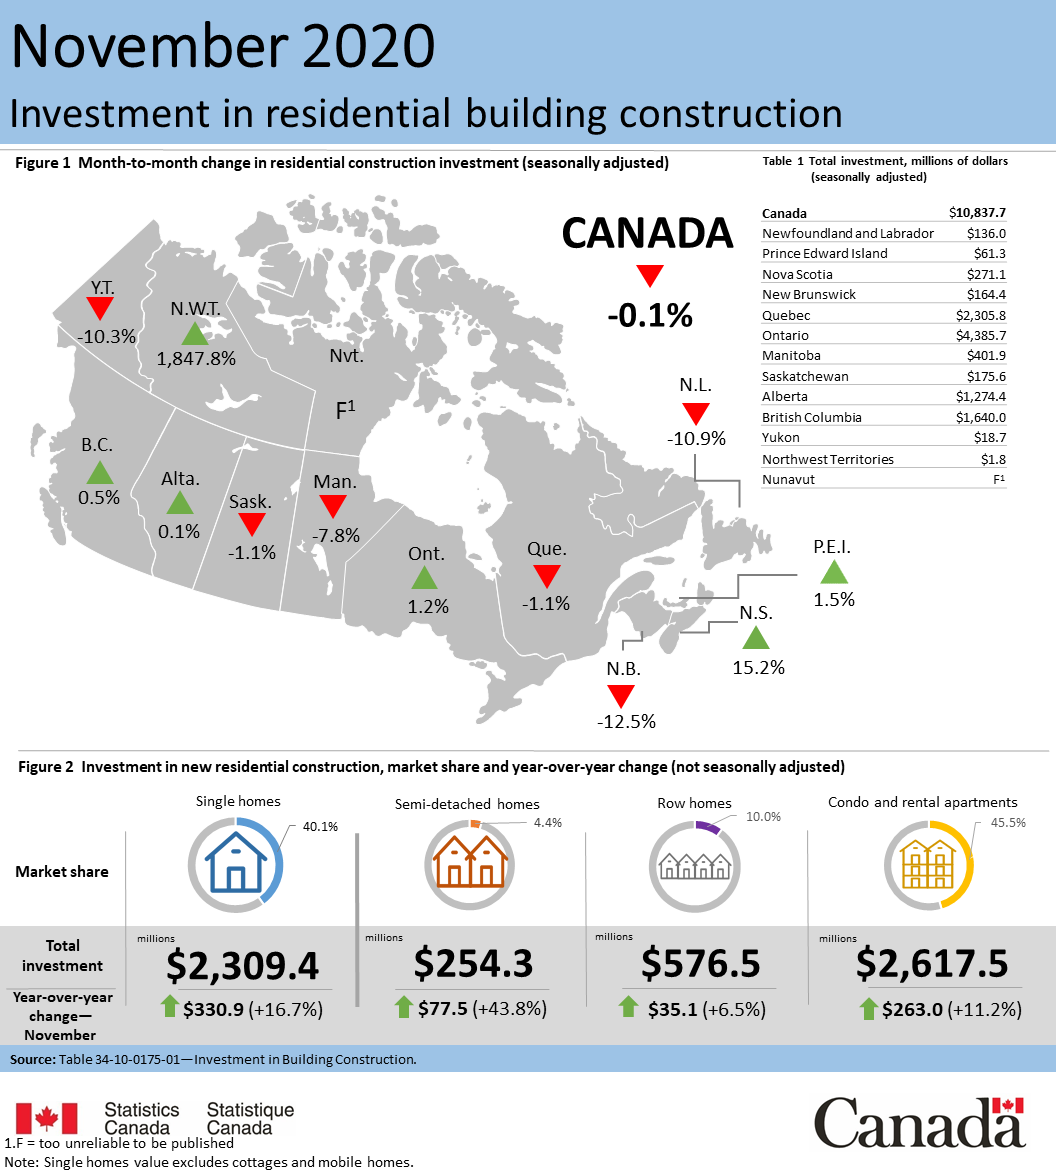 Thumbnail for Infographic 2: Investment in residential building construction, November 2020